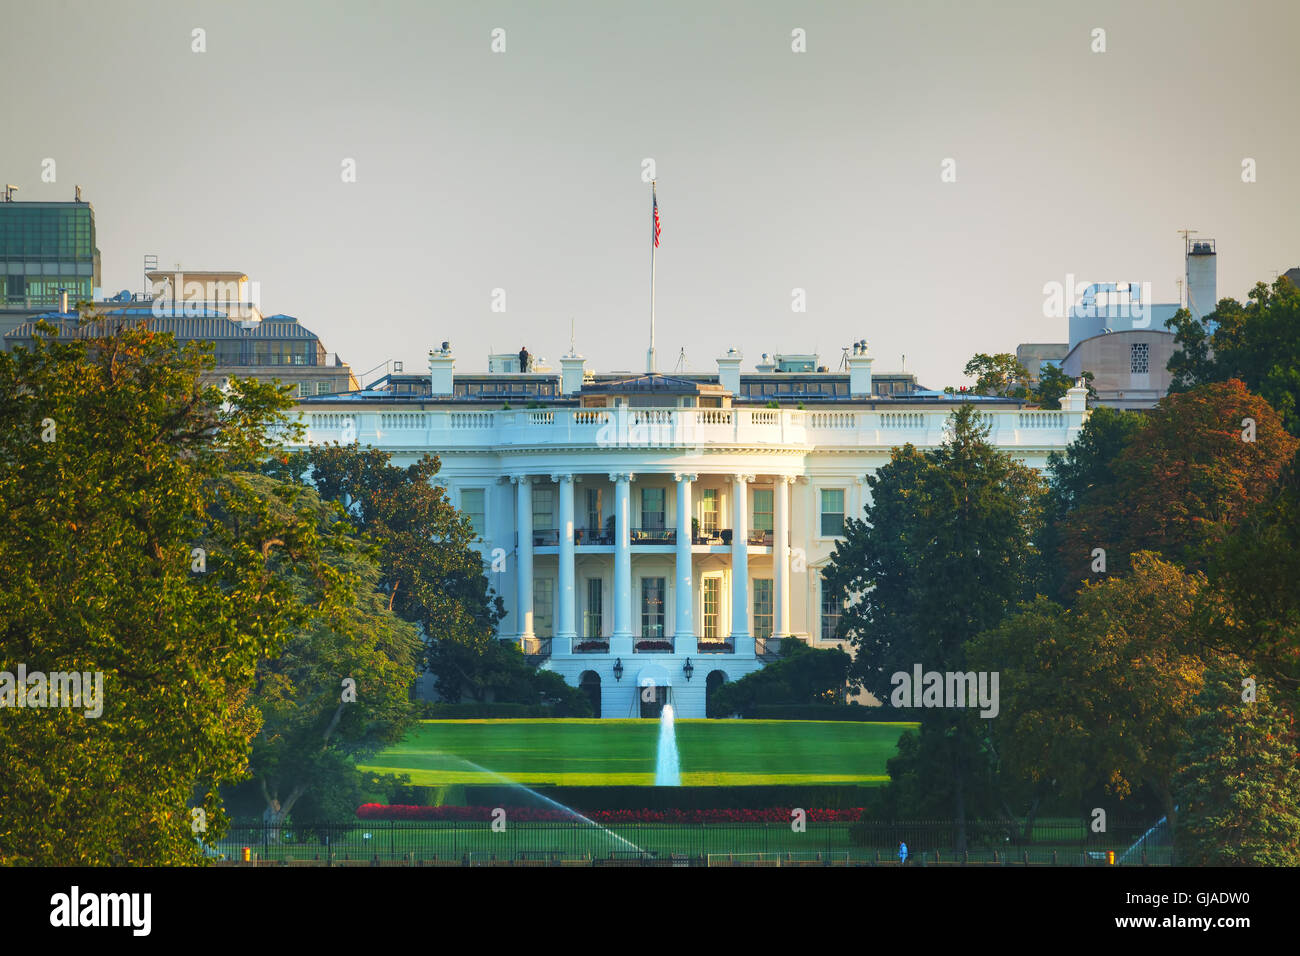 The White House building in Washington, DC in the evening Stock Photo